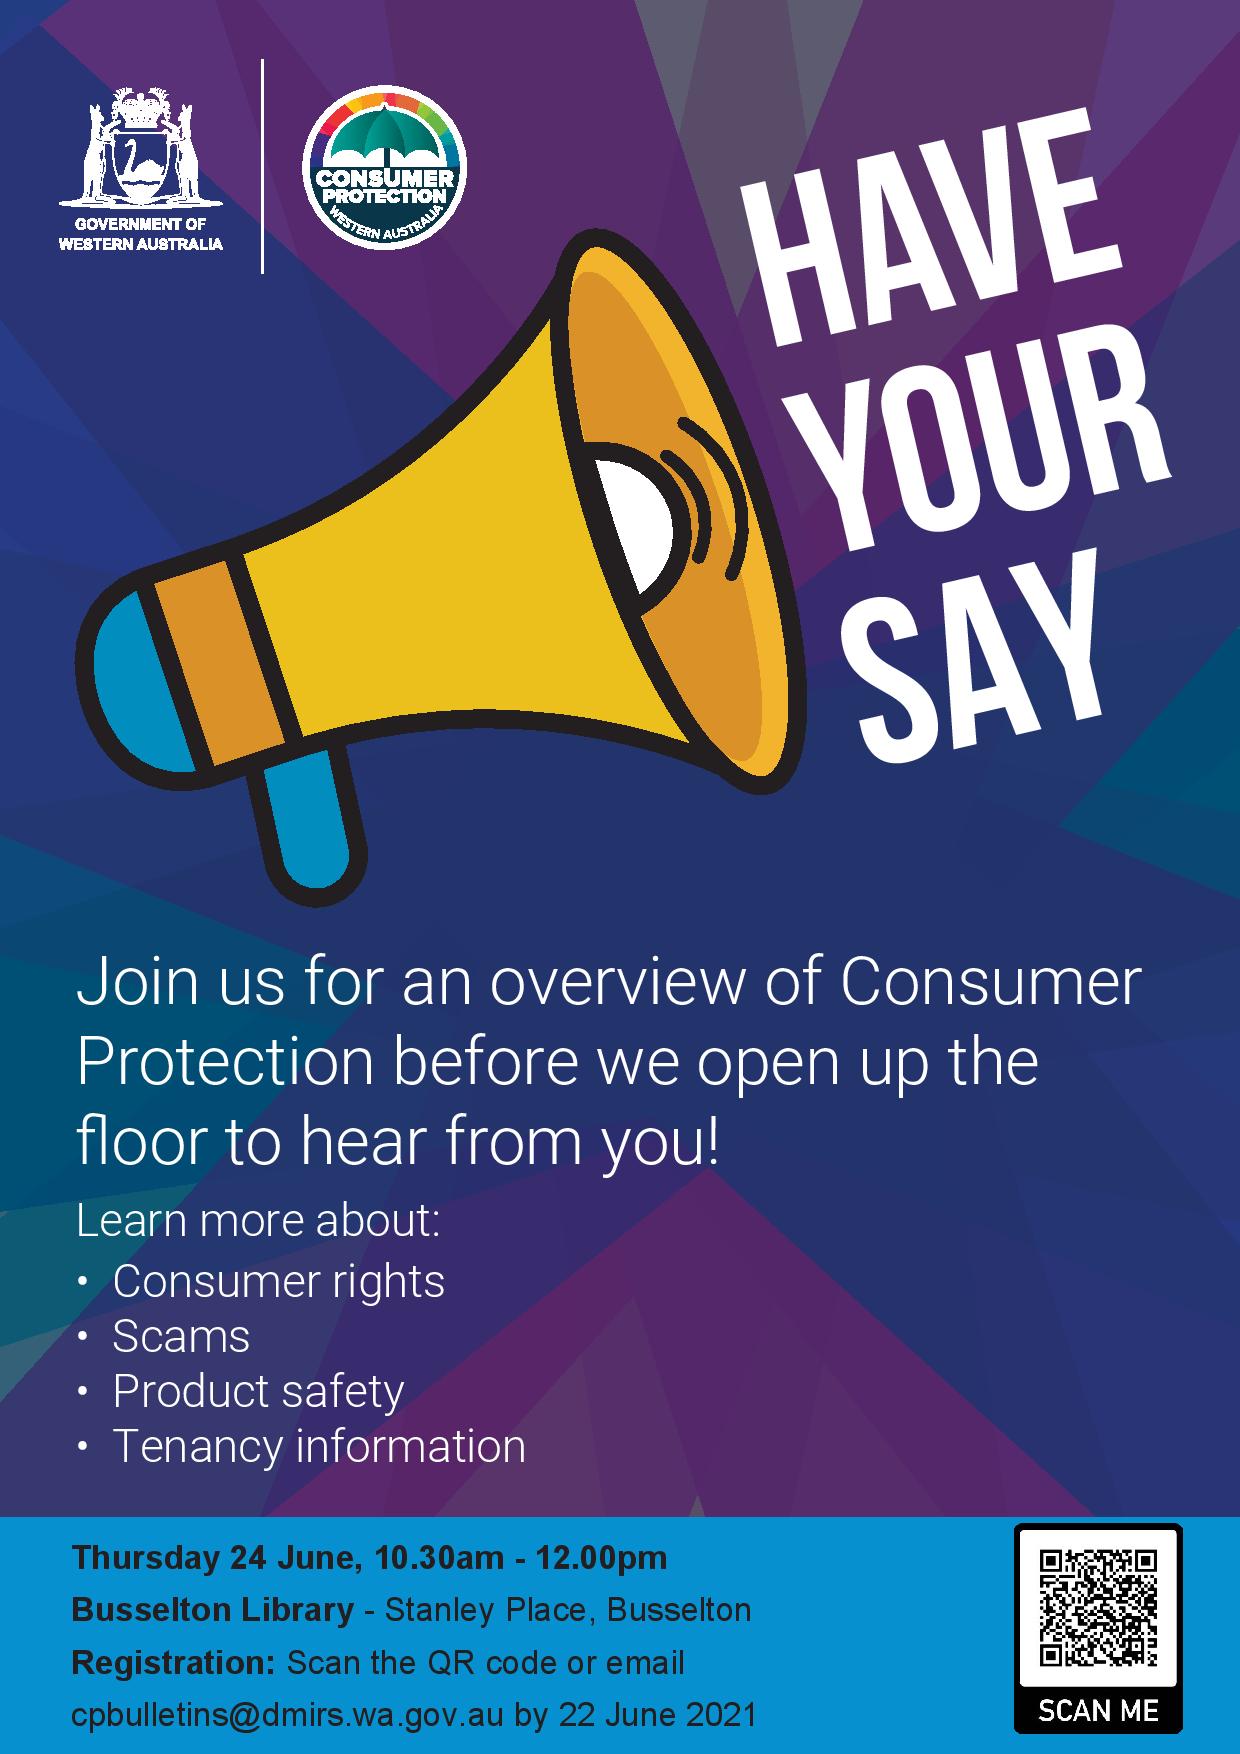 Have your say Busselton page 001